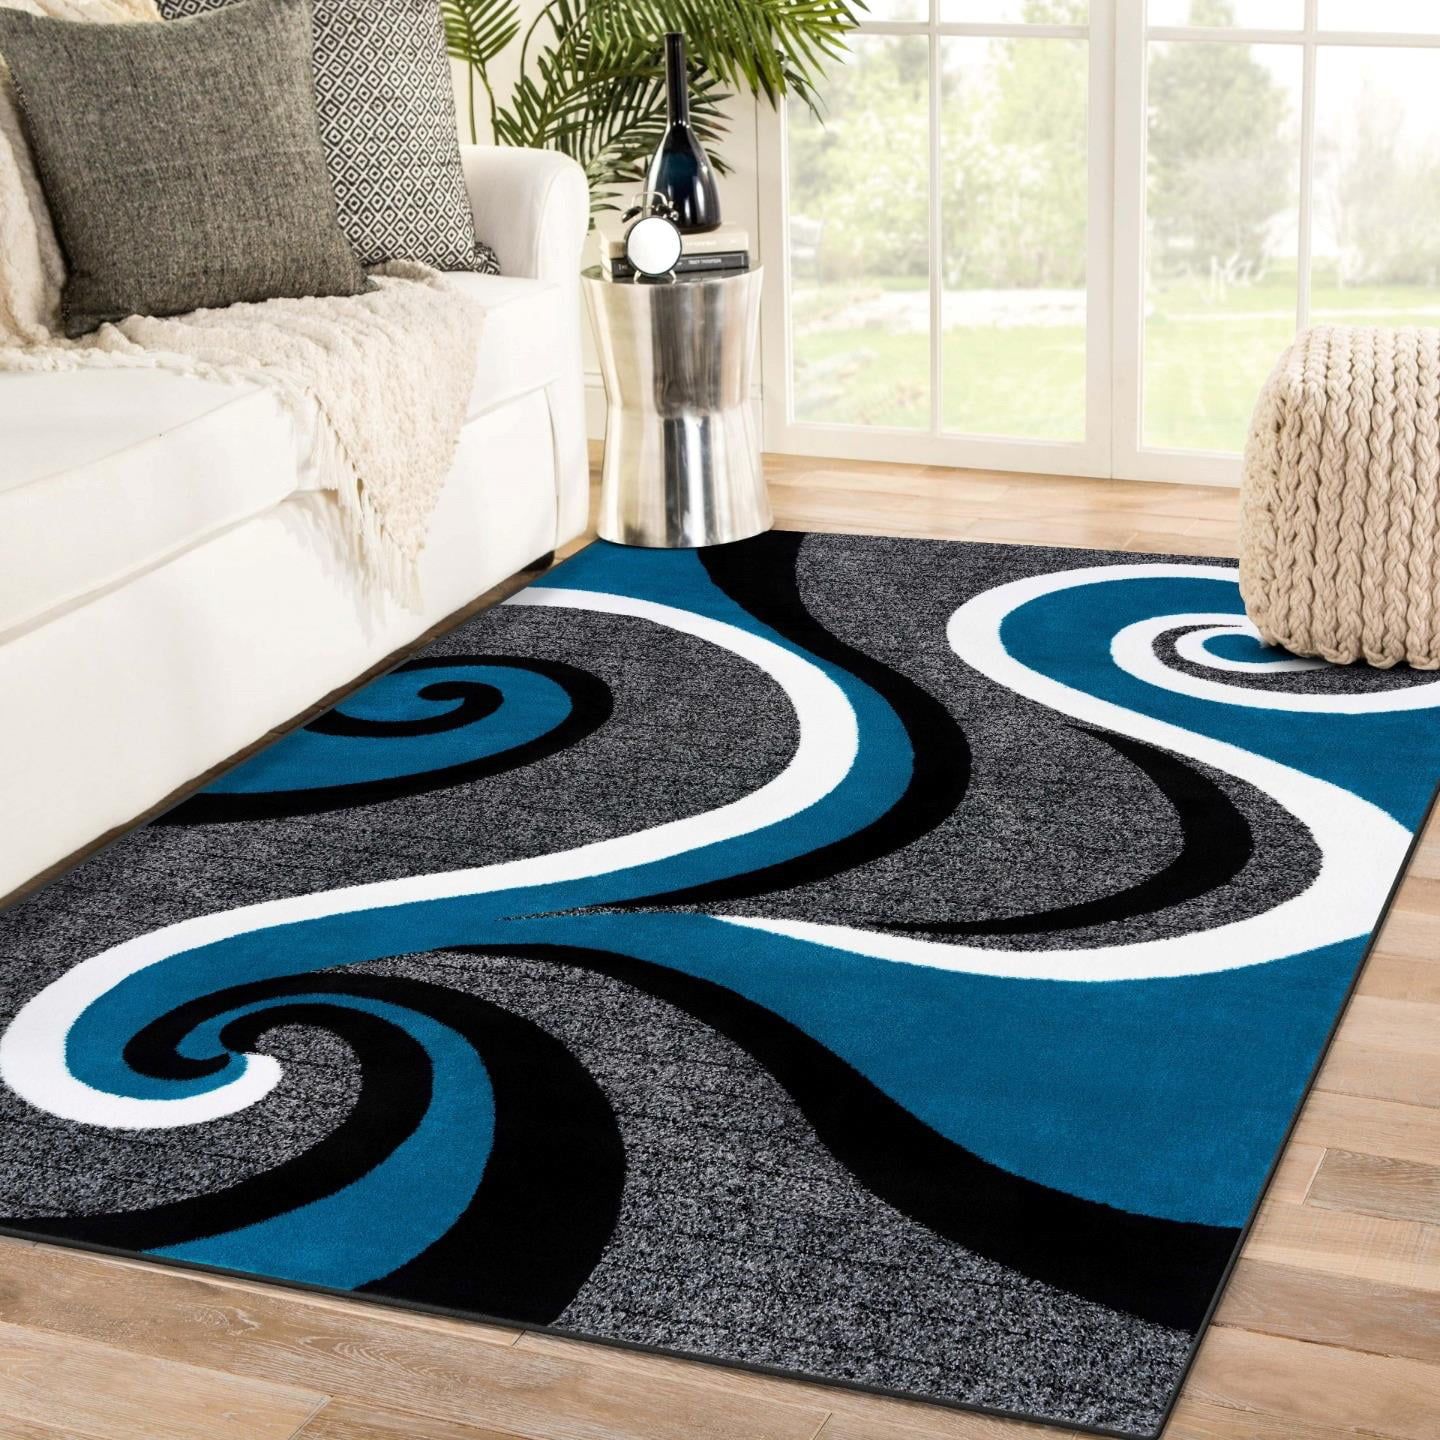 Luxe Weavers Turquoise Swirls Modern Abstract Area Rug 4X5 – Walmart In Blue Rugs (View 13 of 15)